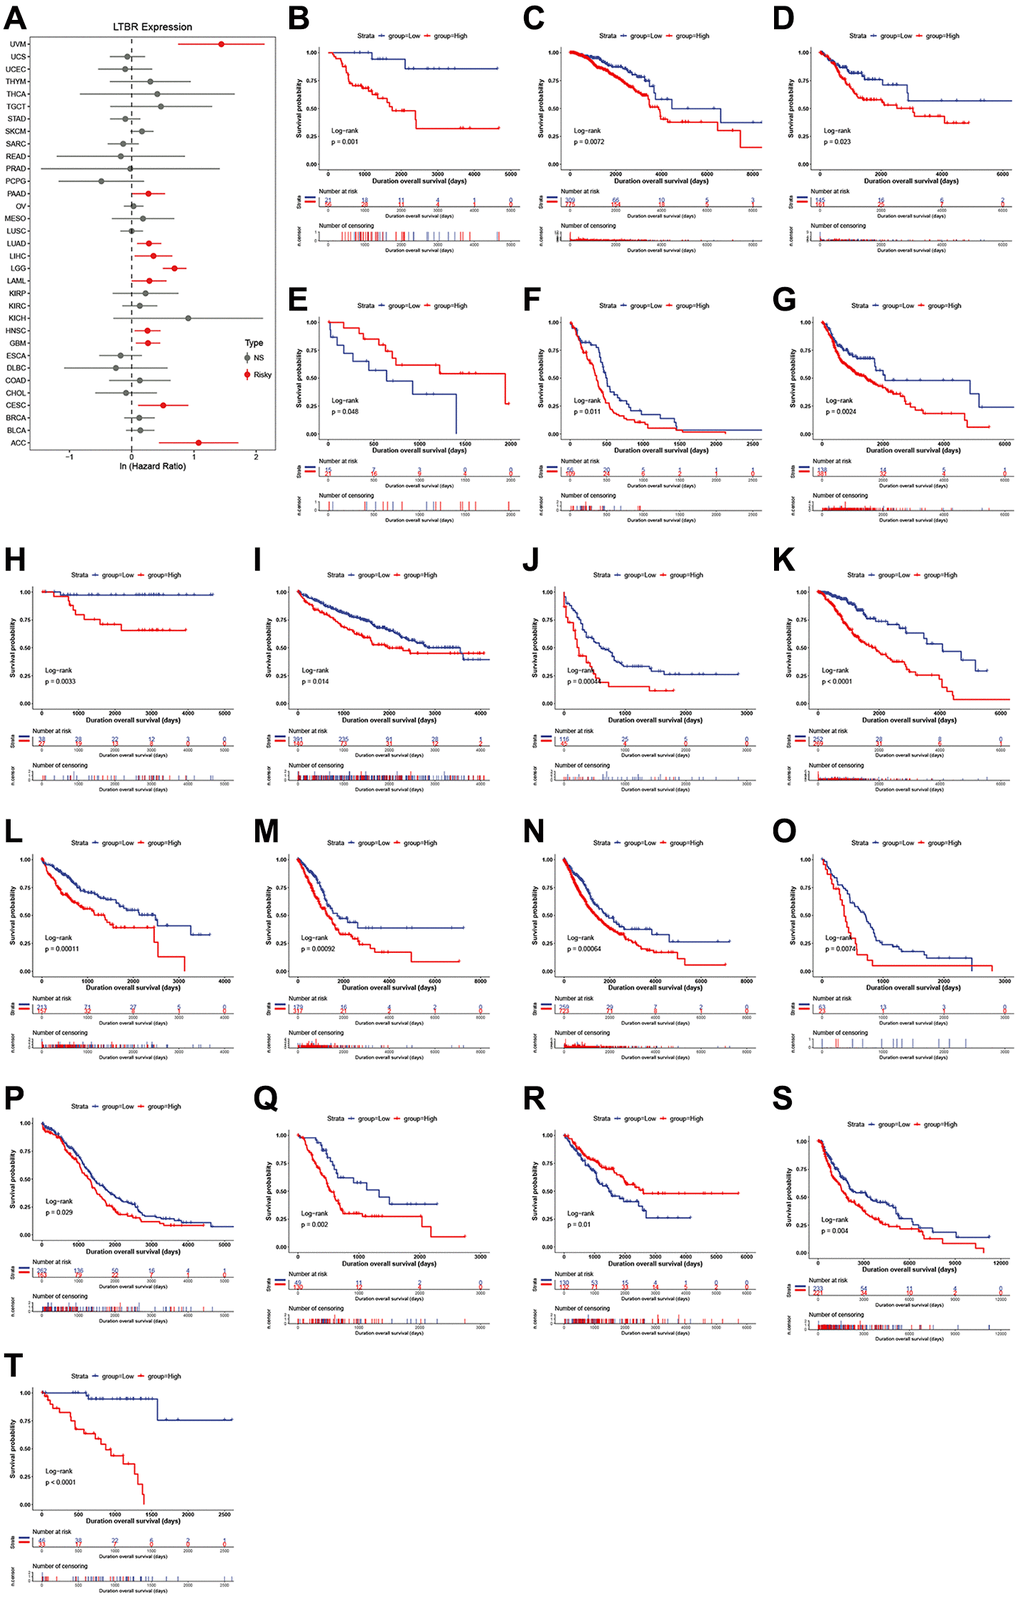 The relationship of LTBR expression with patients’ OS. (A) Forest plots of hazard ratios of LTBR in 33 cancer types. Log-rank test OS curves for patients stratified by different expression levels of LTBR in (B) ACC, (C) BRCA, (D) CESC, (E) CHOL, (F) GBM, (G) HNSC, (H) KICH, (I) KIRC, (J) LAML, (K) LGG, (L) LIHC, (M) LUAD, (N) LUNG, (O) MESO, (P) OV, (Q) PAAD, (R) SARC, (S) SKCM, (T) UVM.